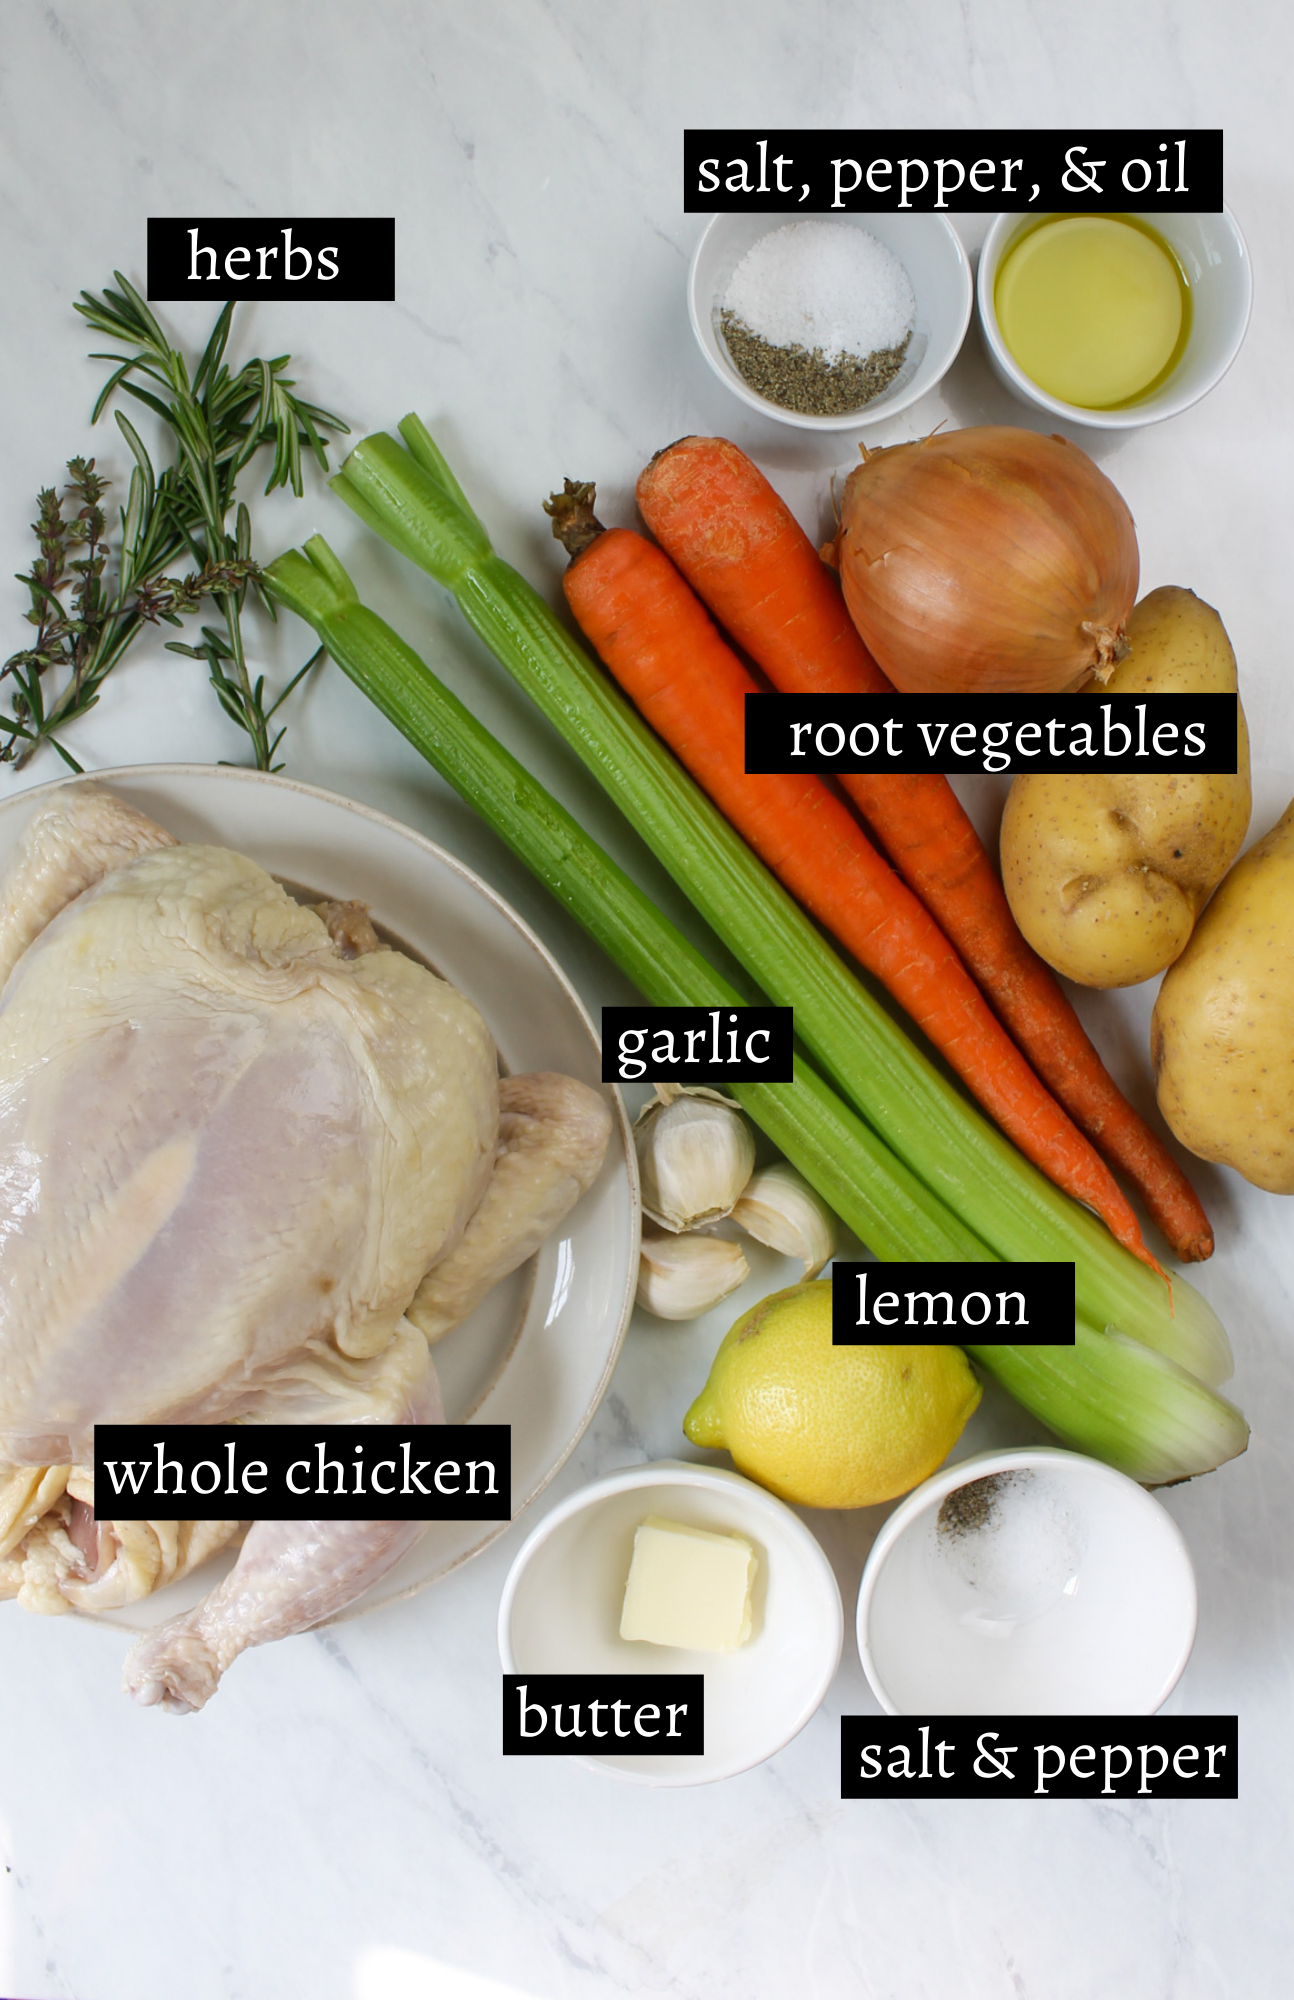 Labeled ingredients for roasted chicken and root vegetables.